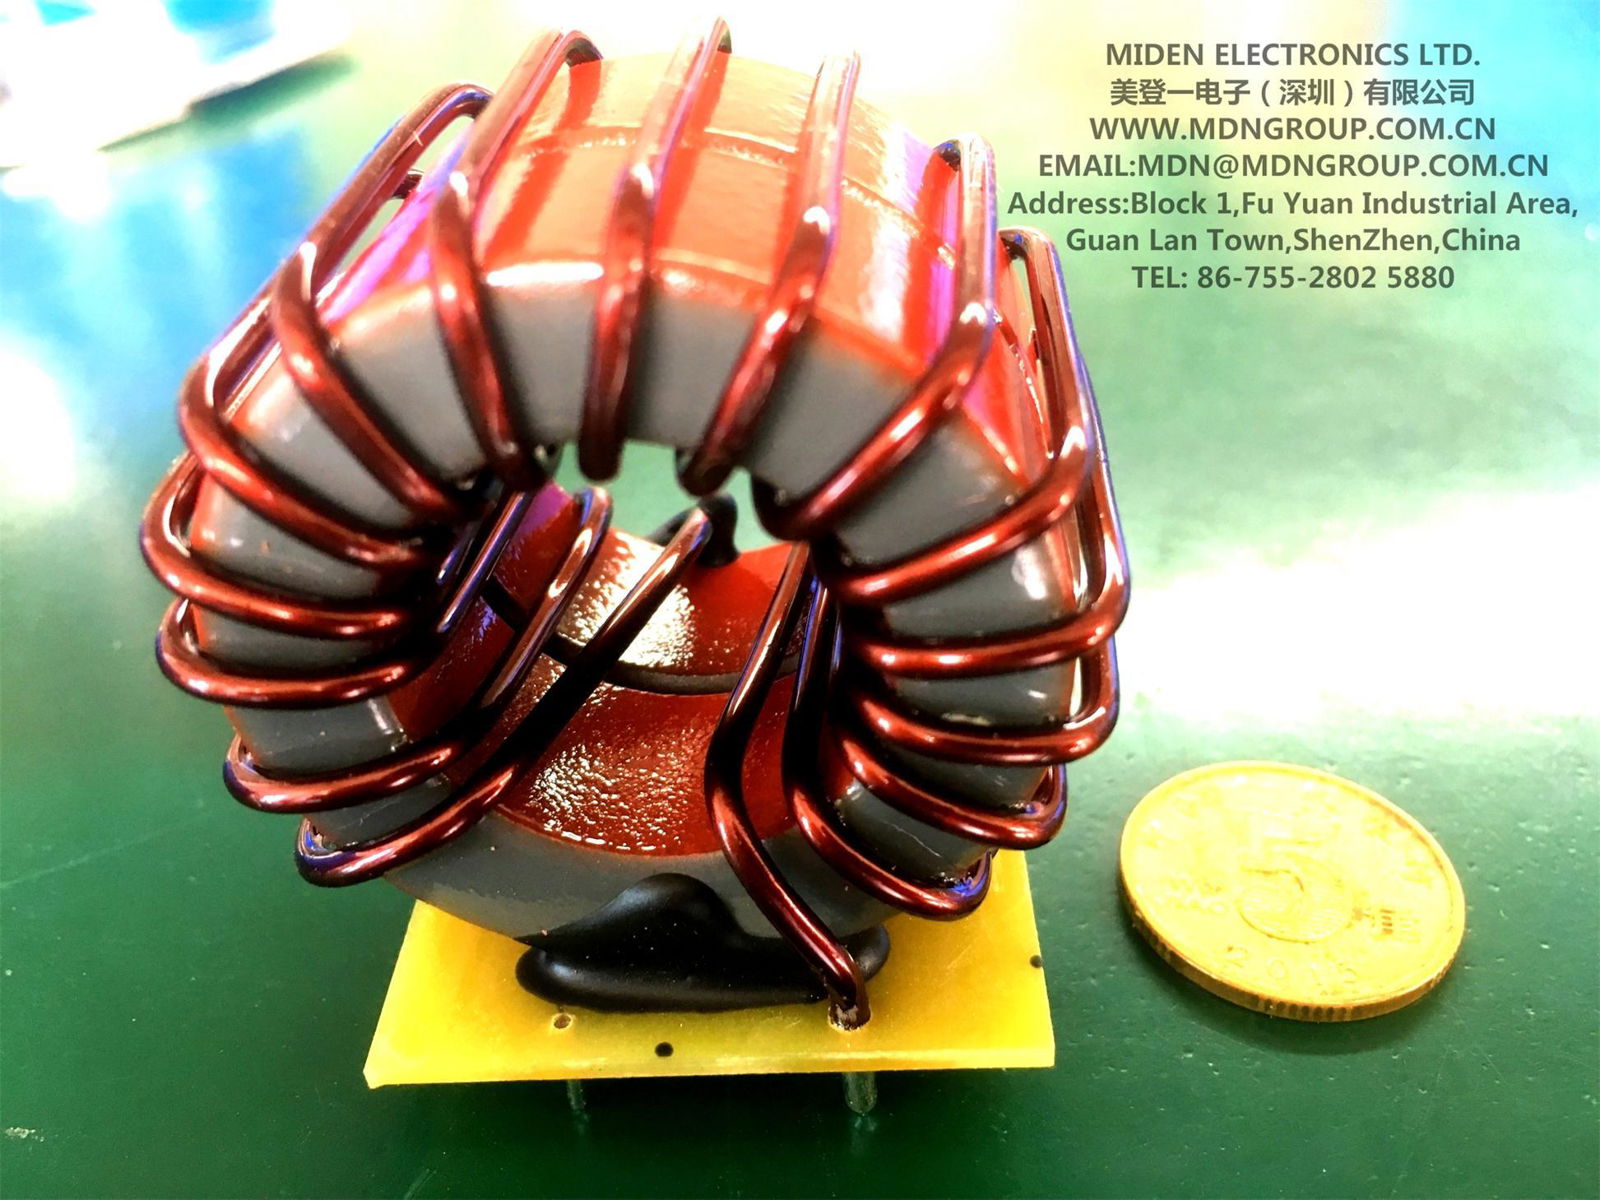 T157-2 Filter inductor